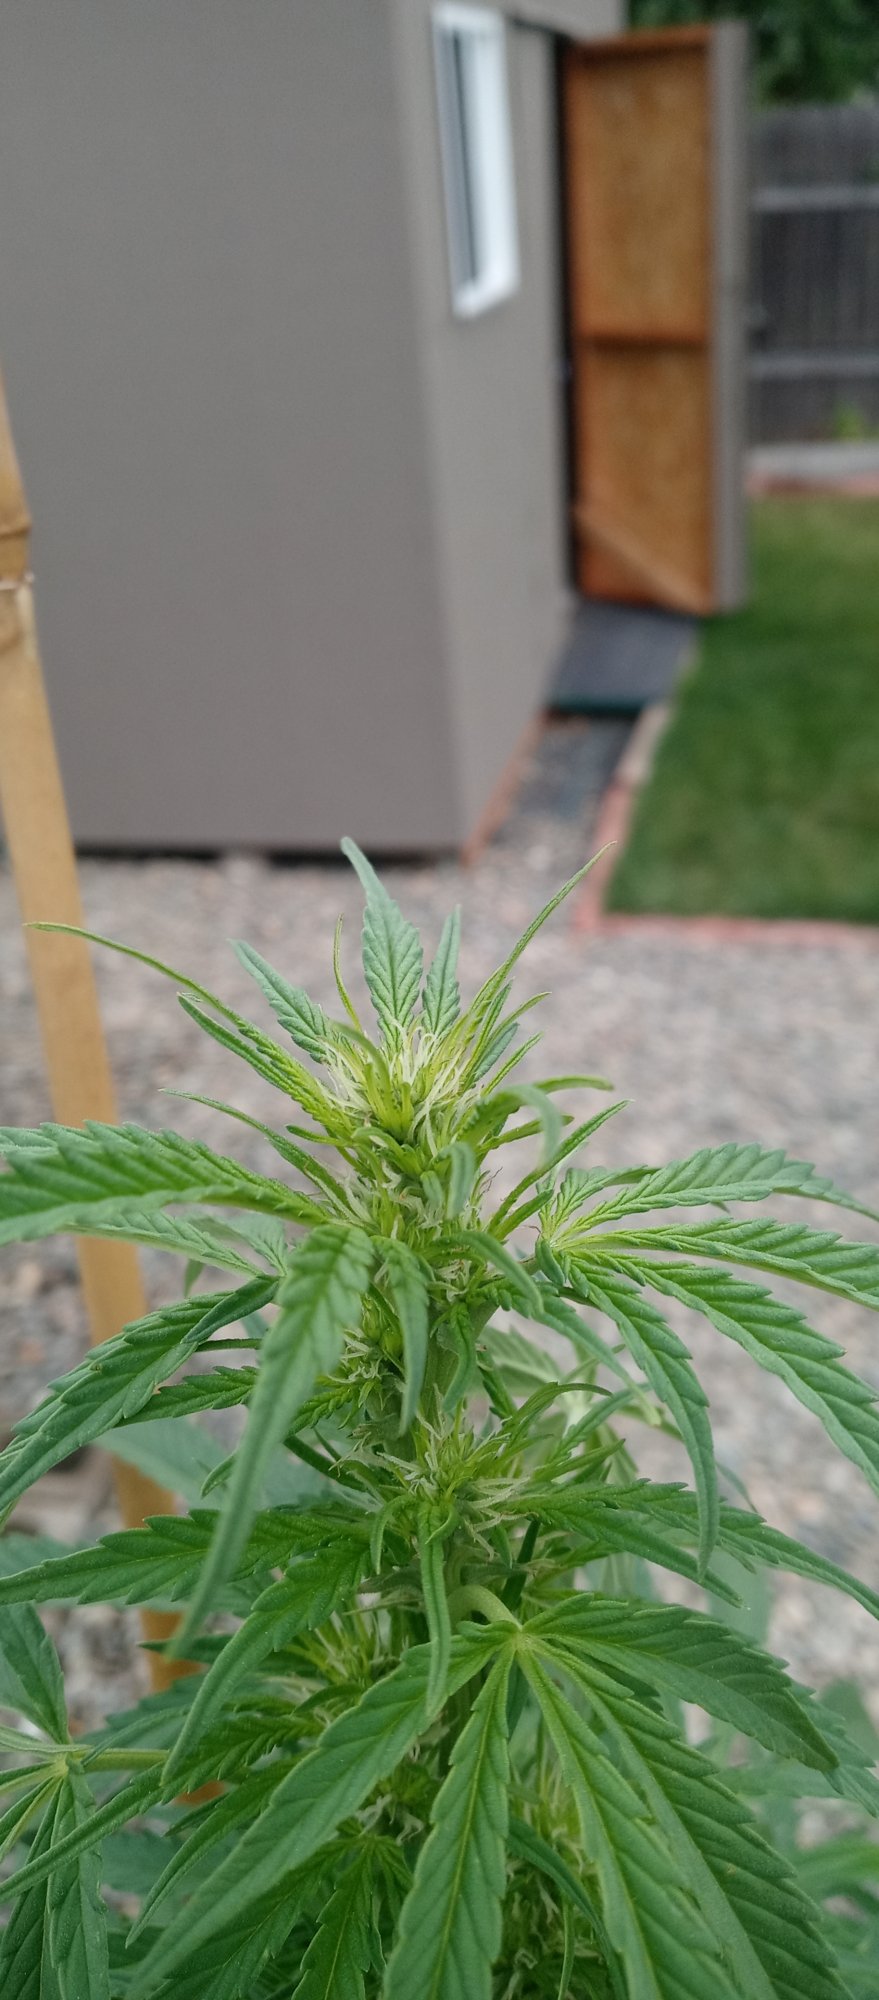 This plant seems to be flowering 2